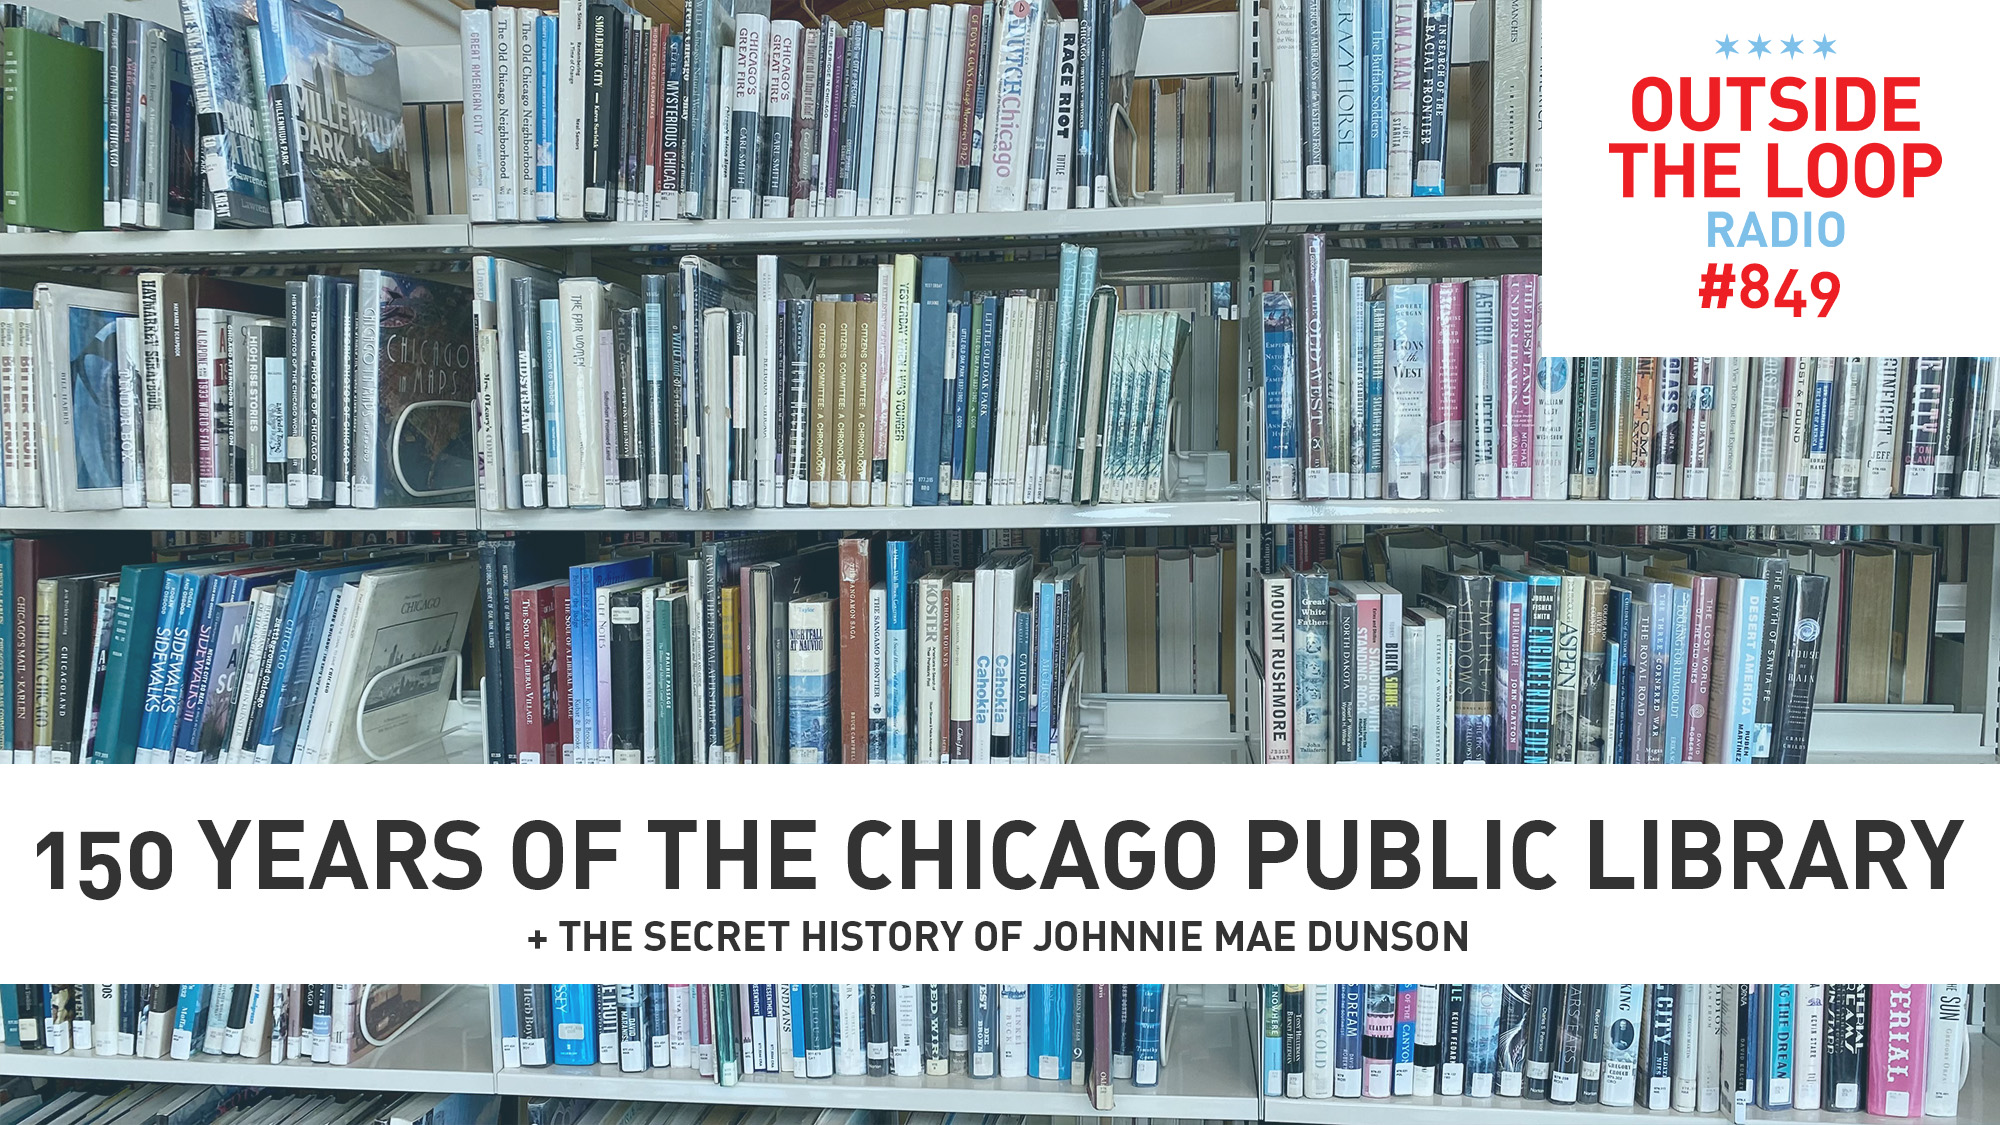 The Chicago Public Library turns 150! (Photo credit: Mike Stephen/WGN Radio)